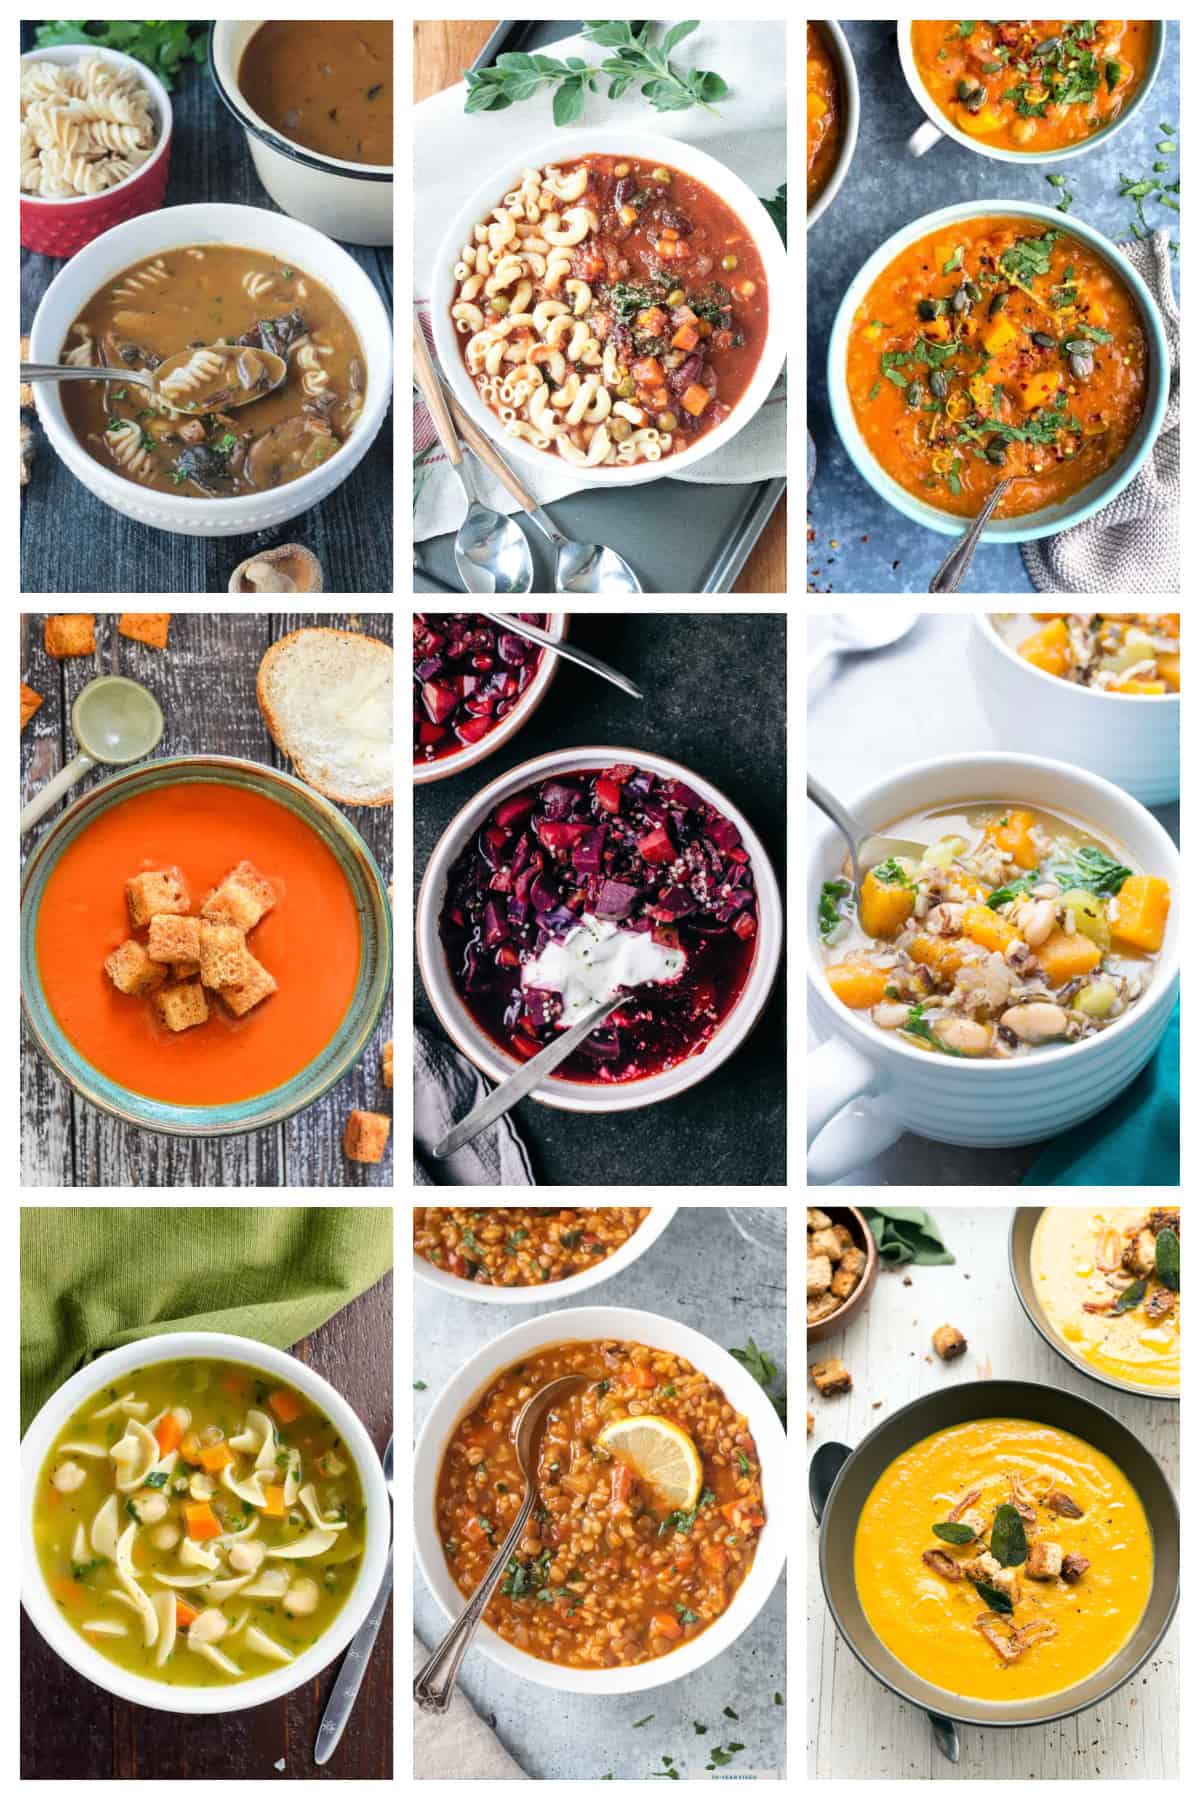 9 photo collage of a variety of vegan soup recipes.